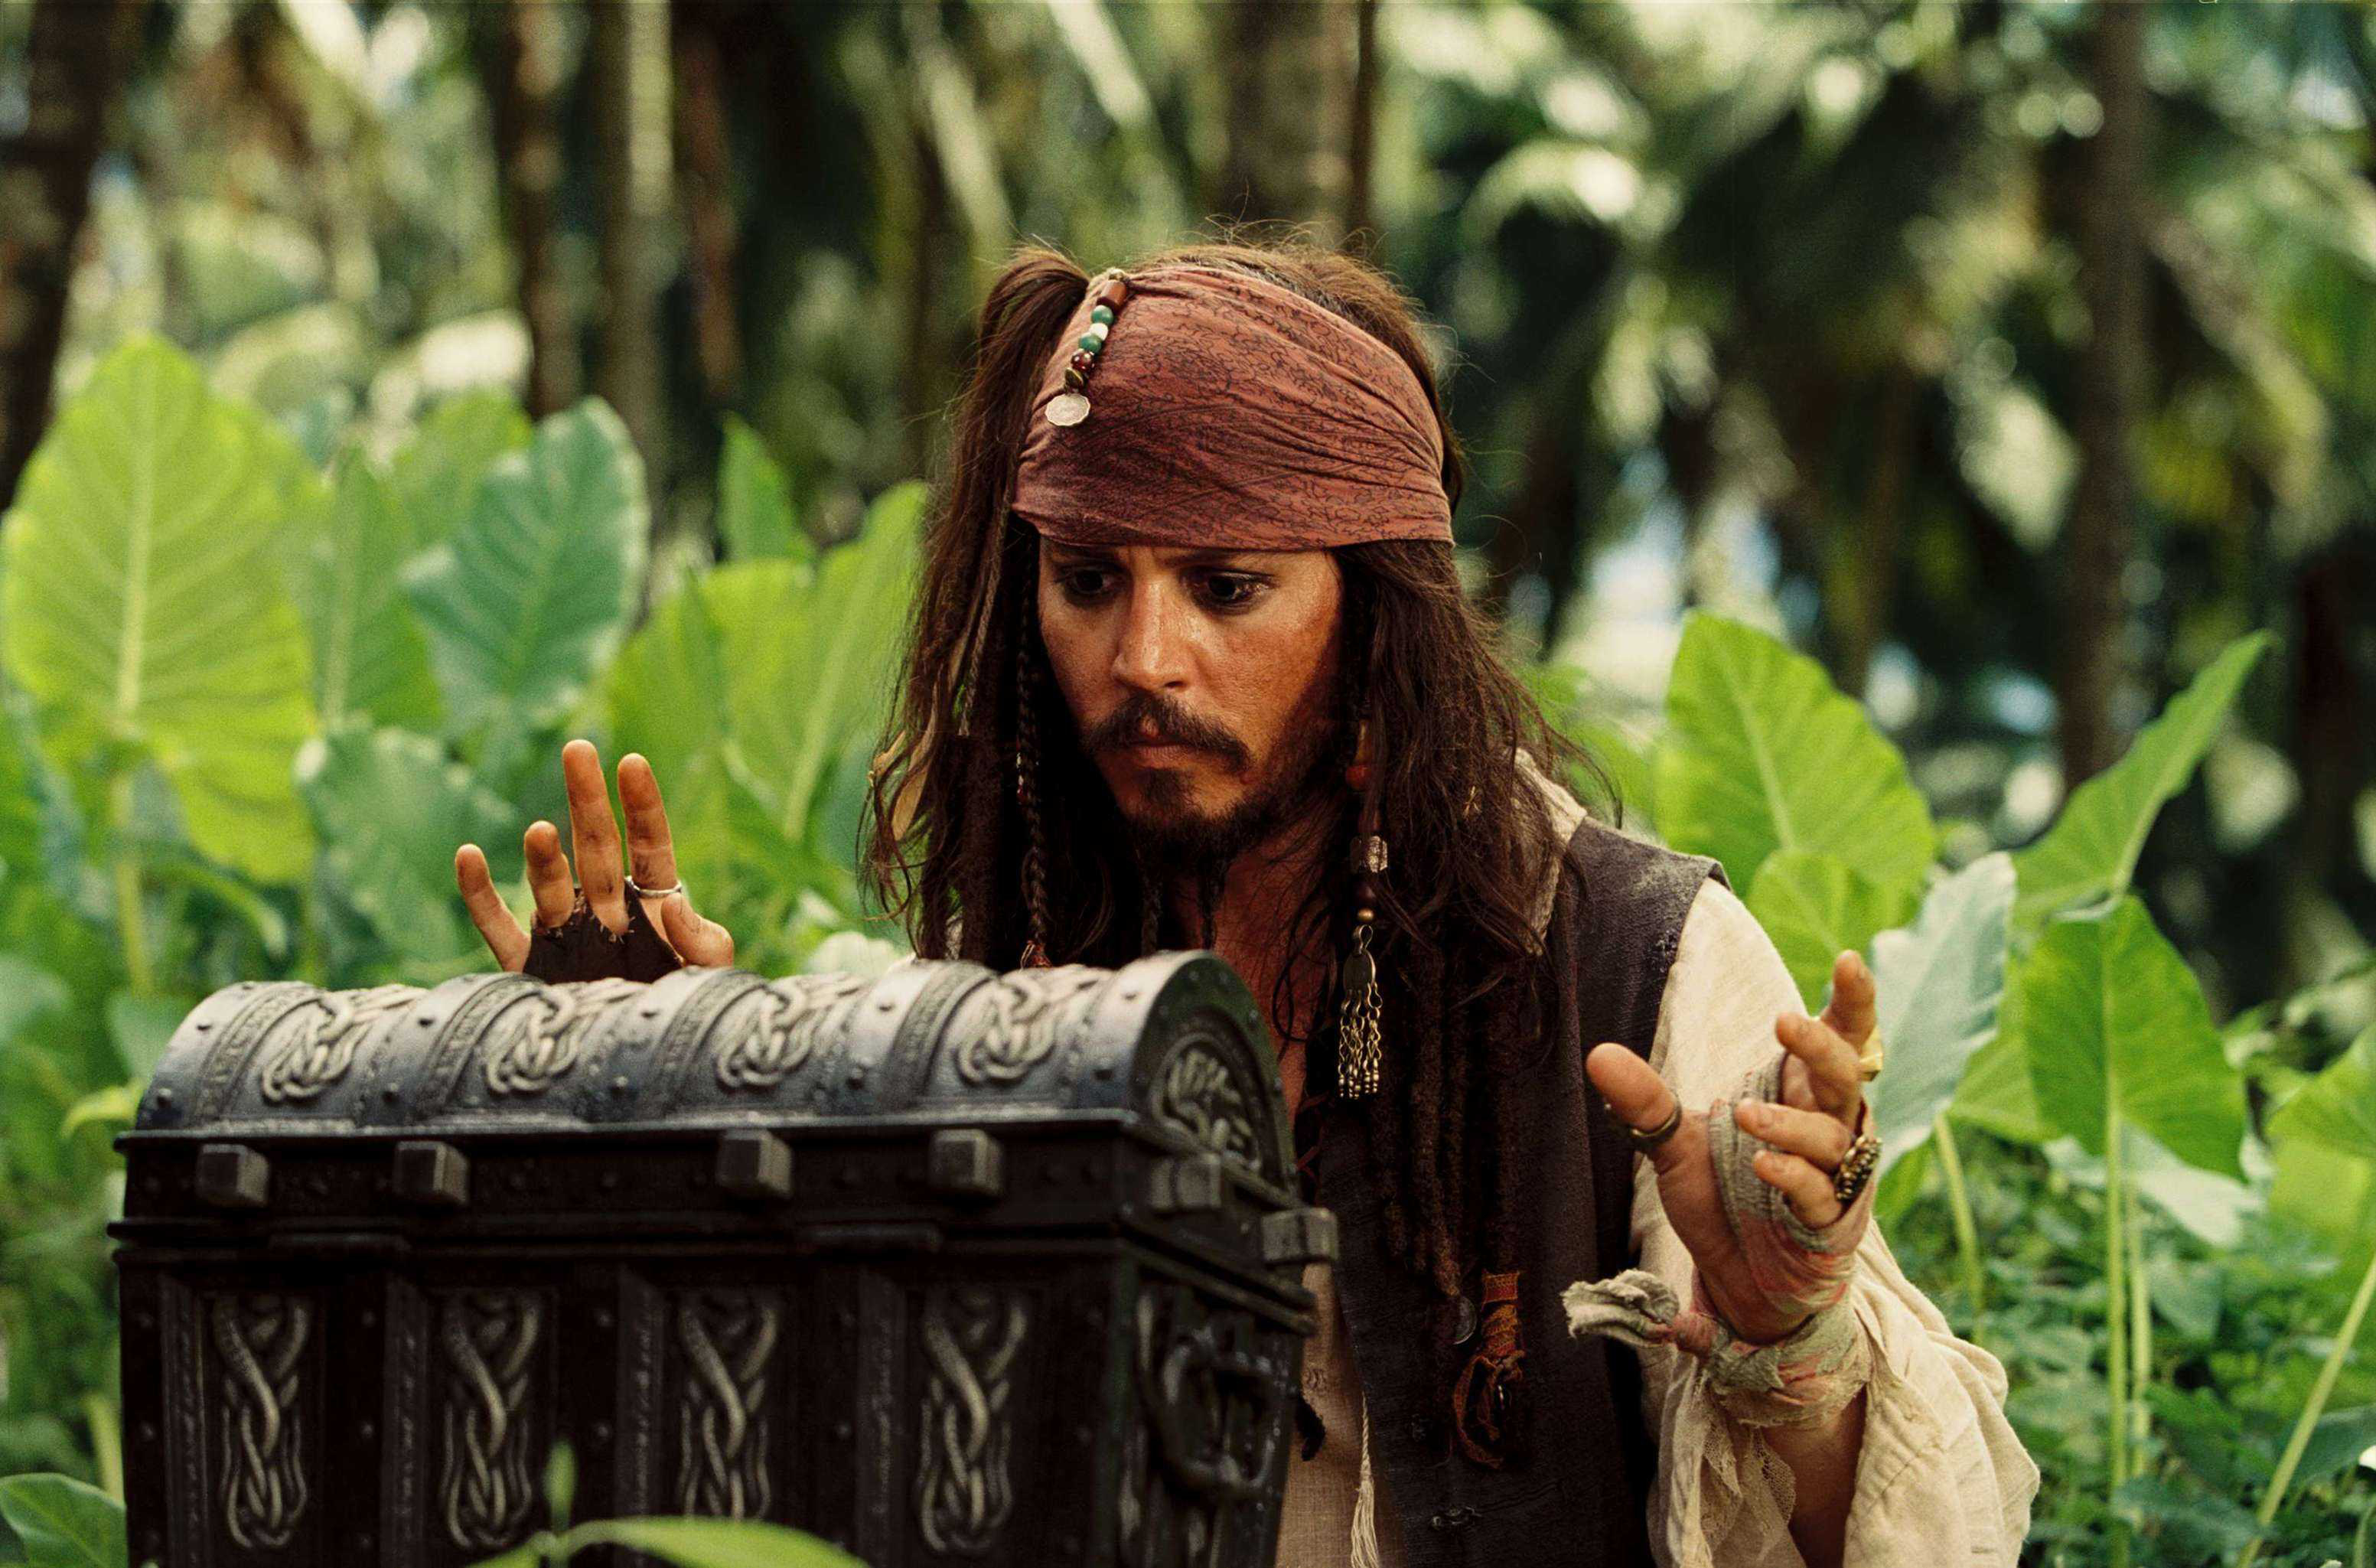 jack sparrow, movie, pirates of the caribbean: dead man's chest, johnny depp, pirates of the caribbean High Definition image